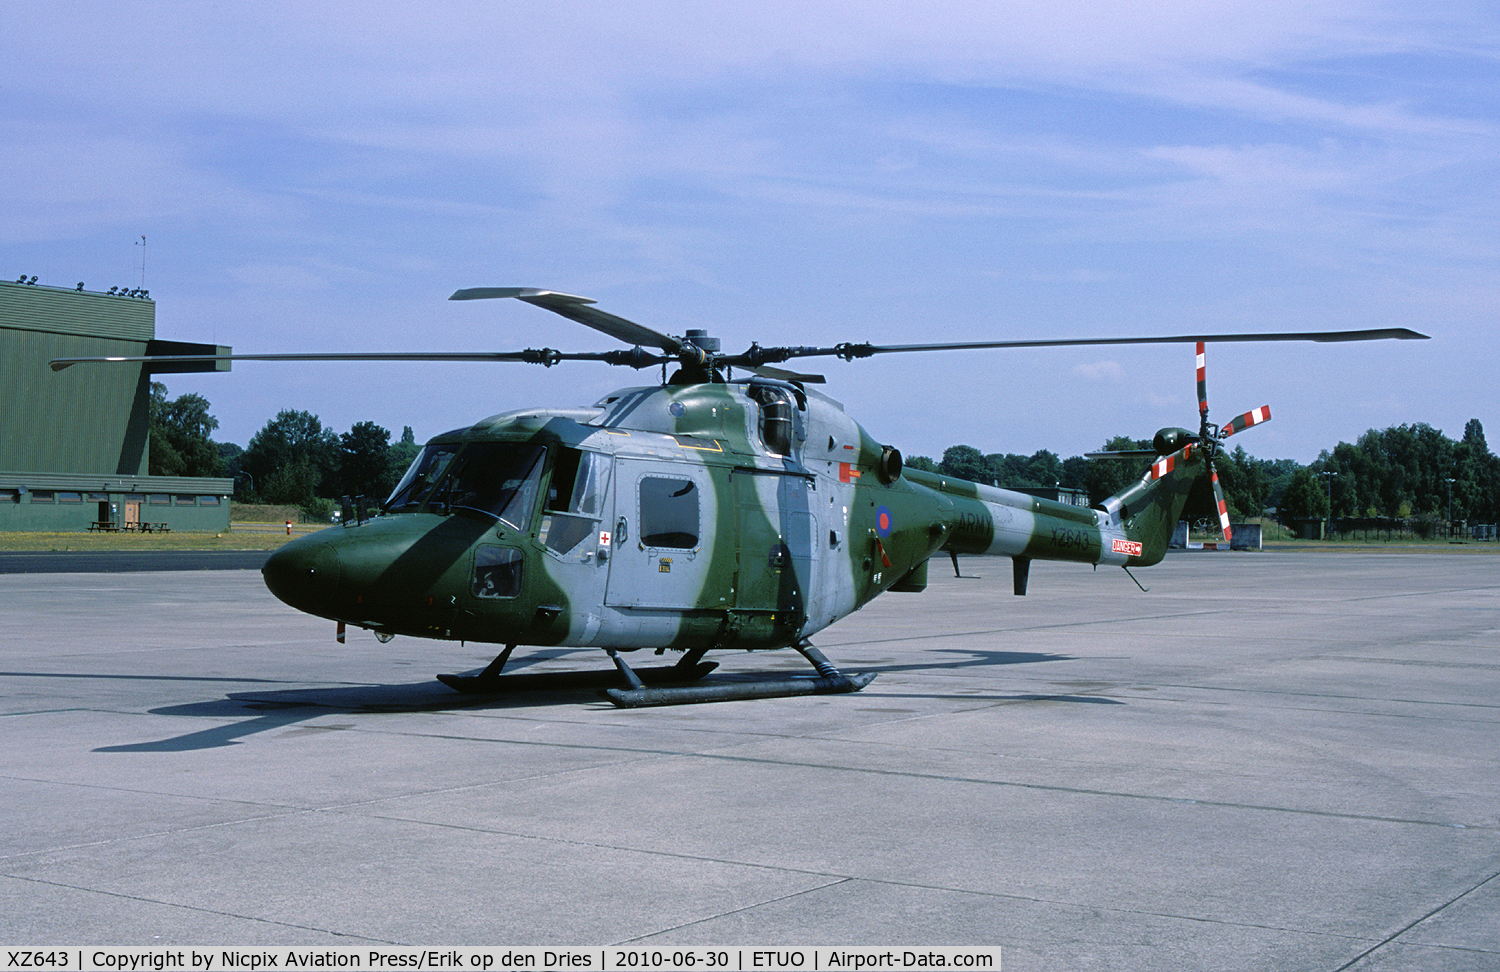 XZ643, 1980 Westland Lynx AH.7 C/N 178, Gutersloh, Germany, based 1 Regiment Army Air Corps operates the Lynx AH.7. XZ643 is seen here on the ramp of its' homebase.